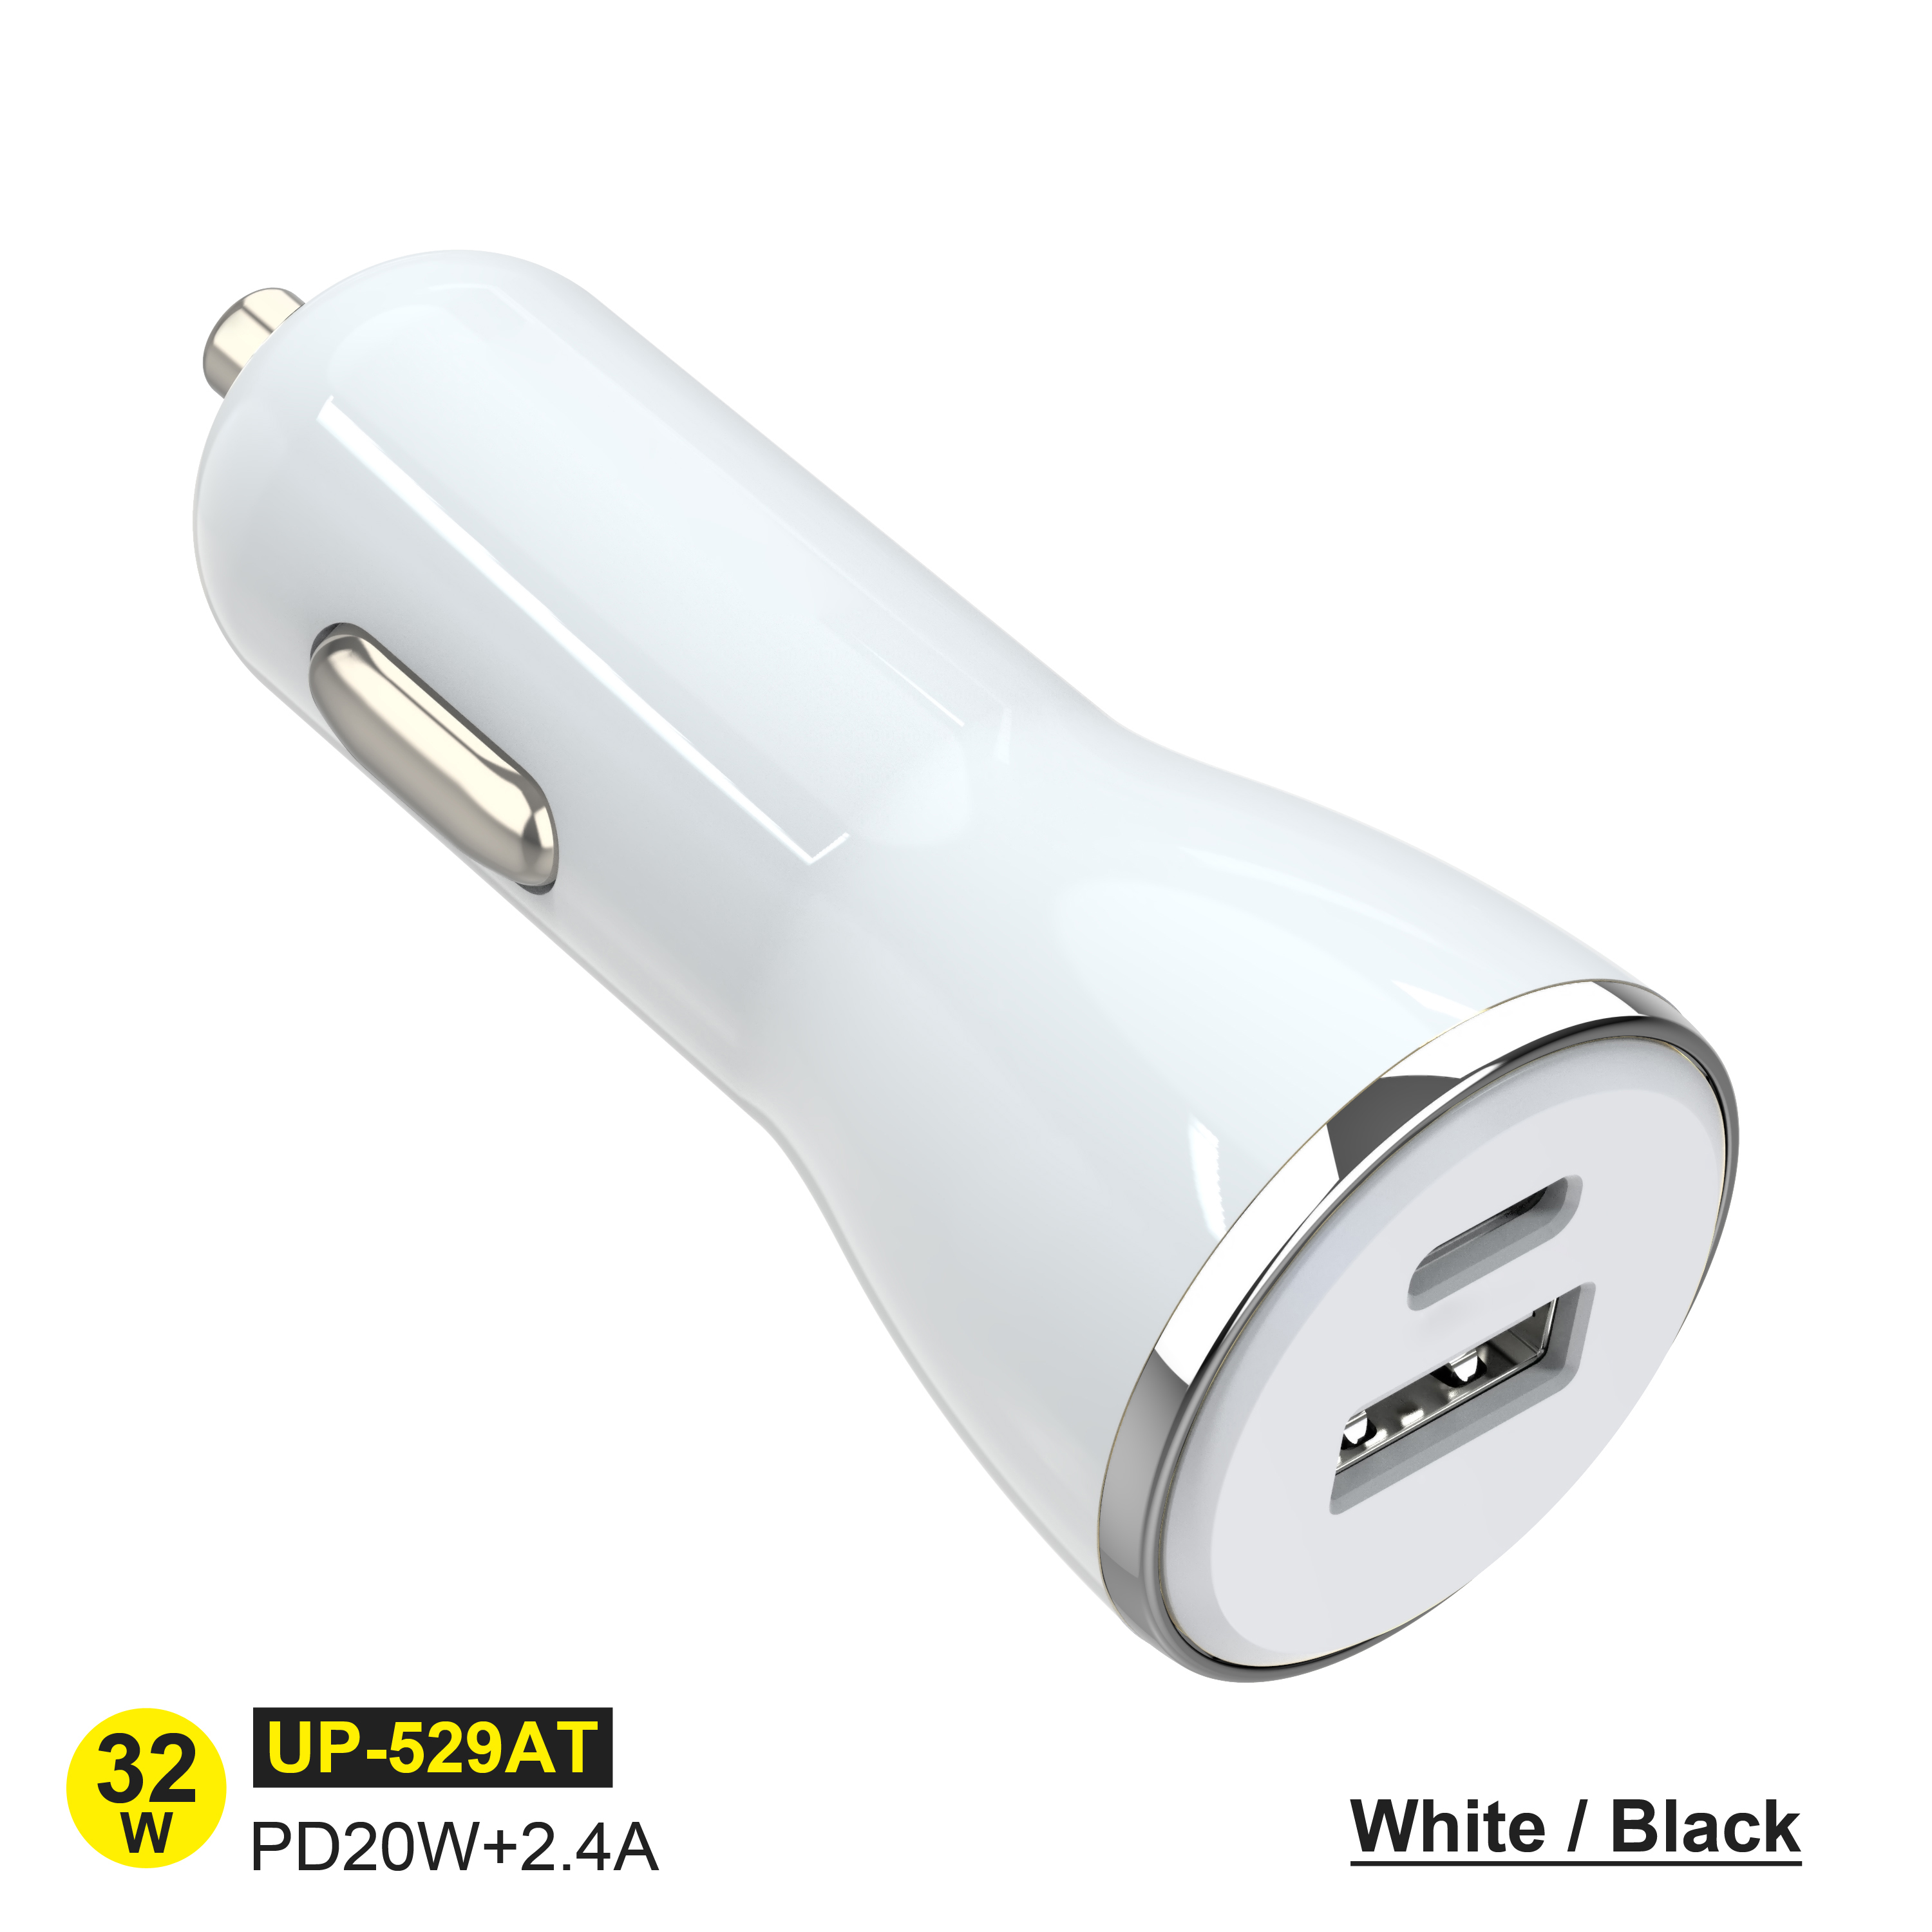 PD20W + 2.4 USB car charger Manufacturers, PD20W + 2.4 USB car charger Factory, Supply PD20W + 2.4 USB car charger